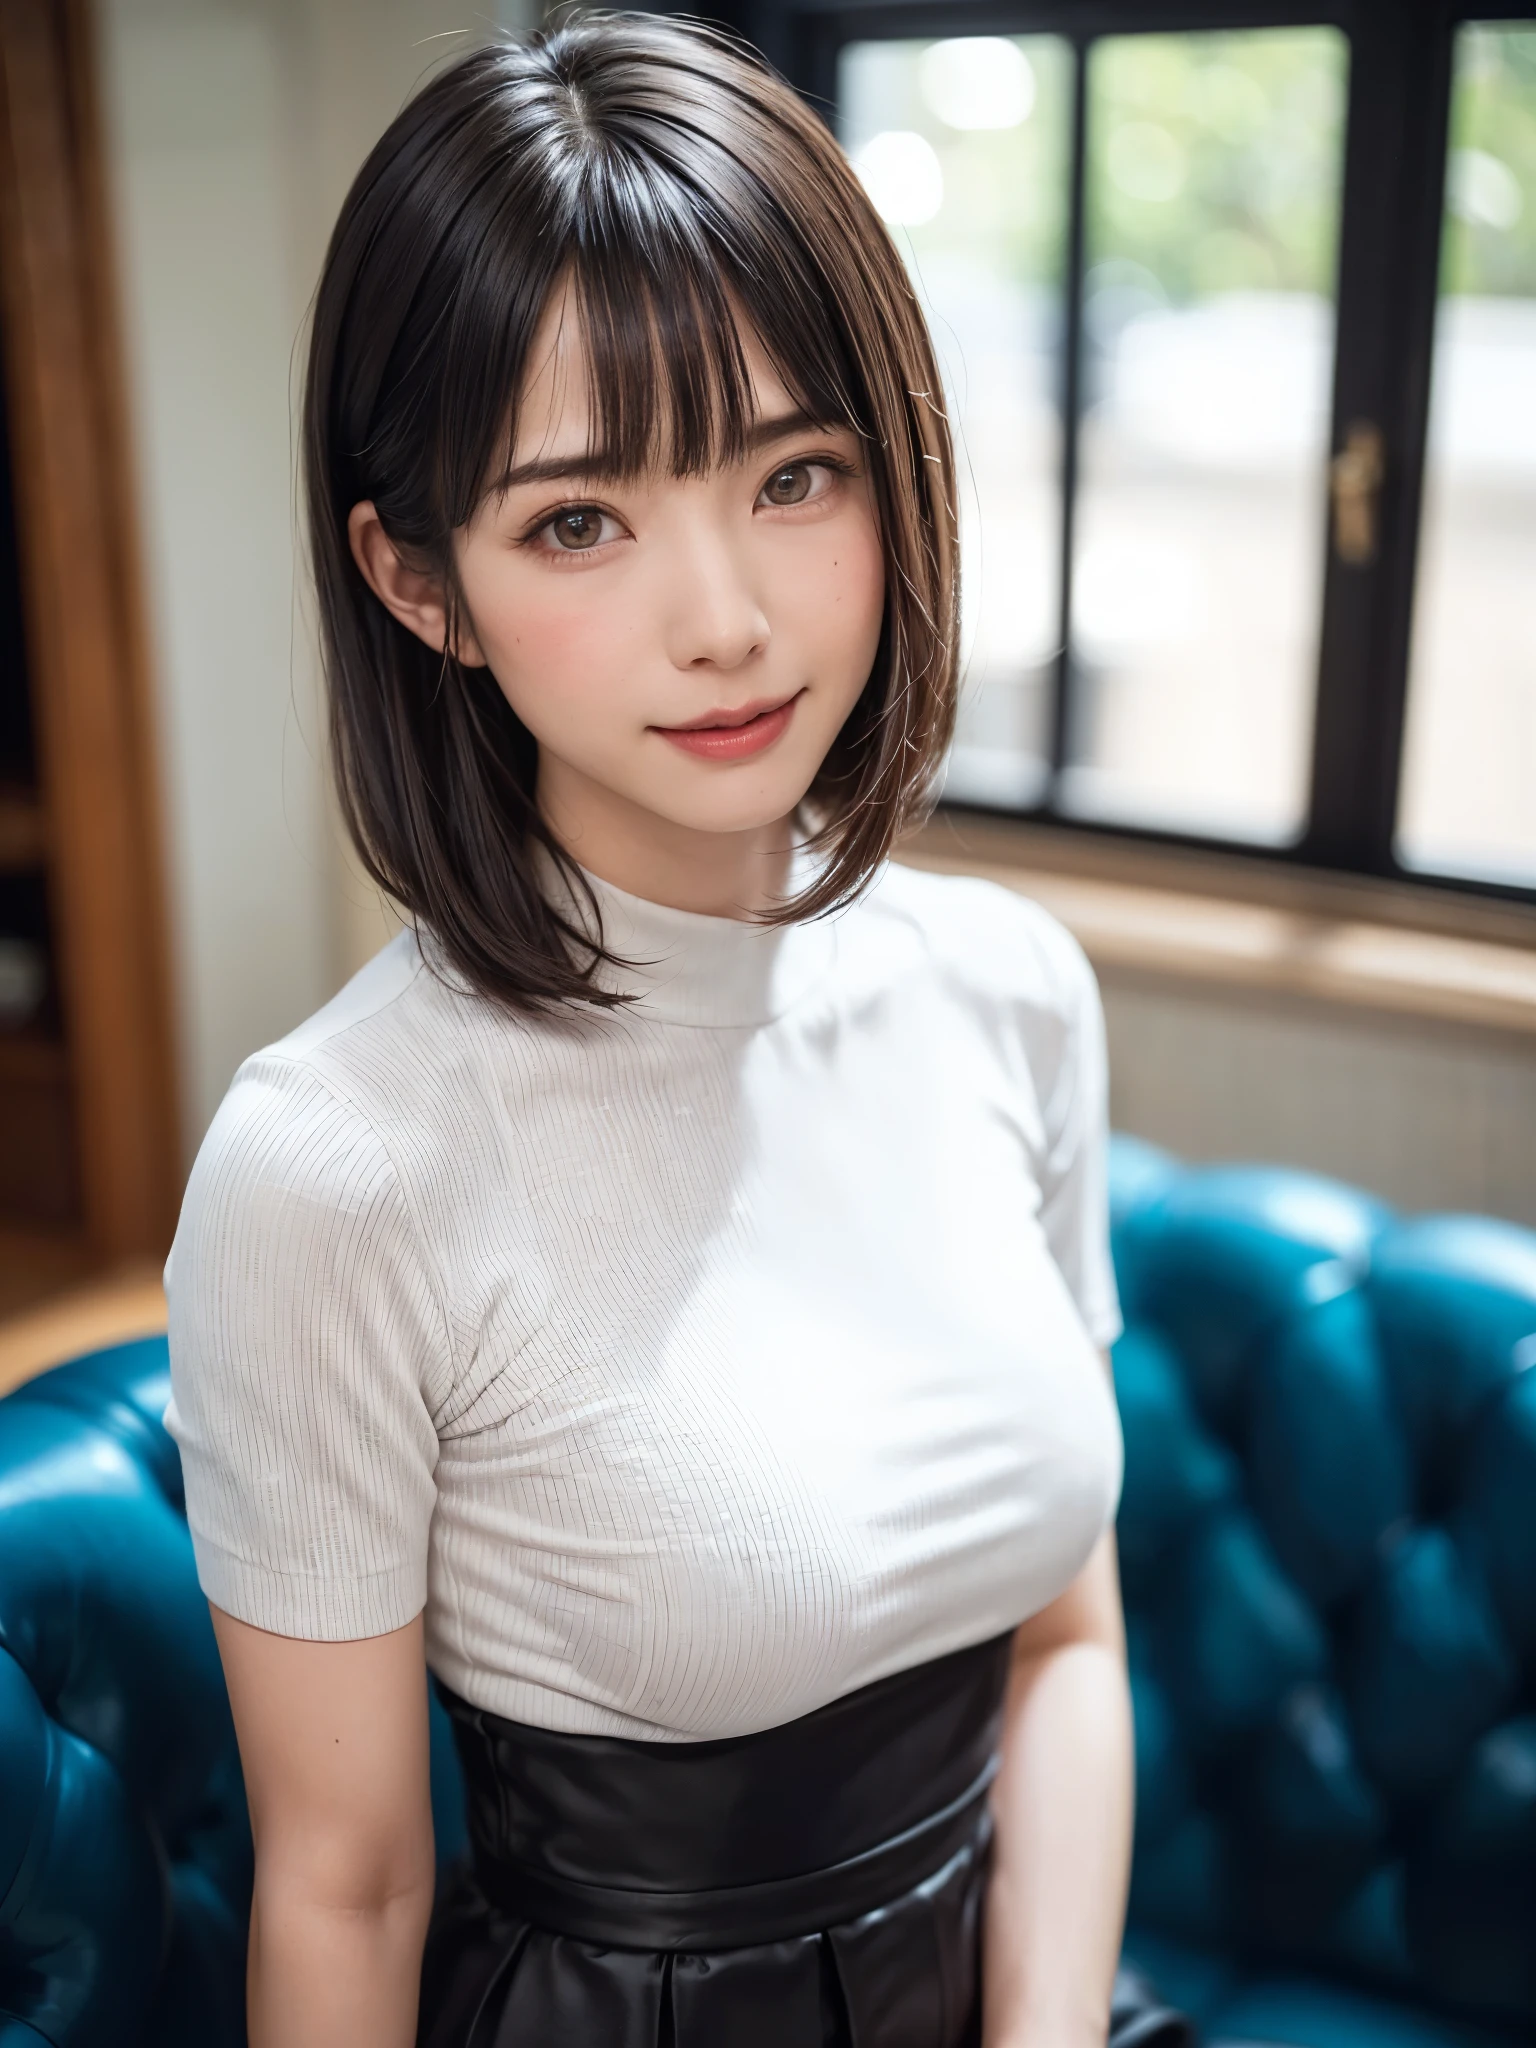 (muste piece, highest quality、High definition:1.4、very attractive beauty、Add intense highlights to your eyes、Look firmly at the camera:1.4、A beautiful woman full of charm、Ideal ratio body proportions、perfect anatomy、brunette short bob hair、shiny hair、bangs:1.4、Shiny Bangs:1.4、lip gloss),1 girl, Report, light brown shiny hair, Scarf,real, look at the audience、tilt your head a little, bright colored crystal light blue eyes, shiny short hair、 White turtleneck costume with a hole in the center of the chest,Sexy white turtleneck knit sweater with a round hole in the middle of the chest、 lips, lip gloss, upper part of the body、Big eyes、Lashes、face is a little red、I&#39;m embarrassed)、((italian road in winter))、((short hair with Big eyess、Give students very strong highlights、{gigantic|big breasts|Huge|mega} Generally poor breasts:1.6、very big breastsger Generally poor breasts、look at the viewer、very beautiful beauty、stick out ears、long neck、smile、smile、Feel happy、beautiful teeth、Open your mouth and smile、heart-shaped pupil))、28 years old、very cute super model、